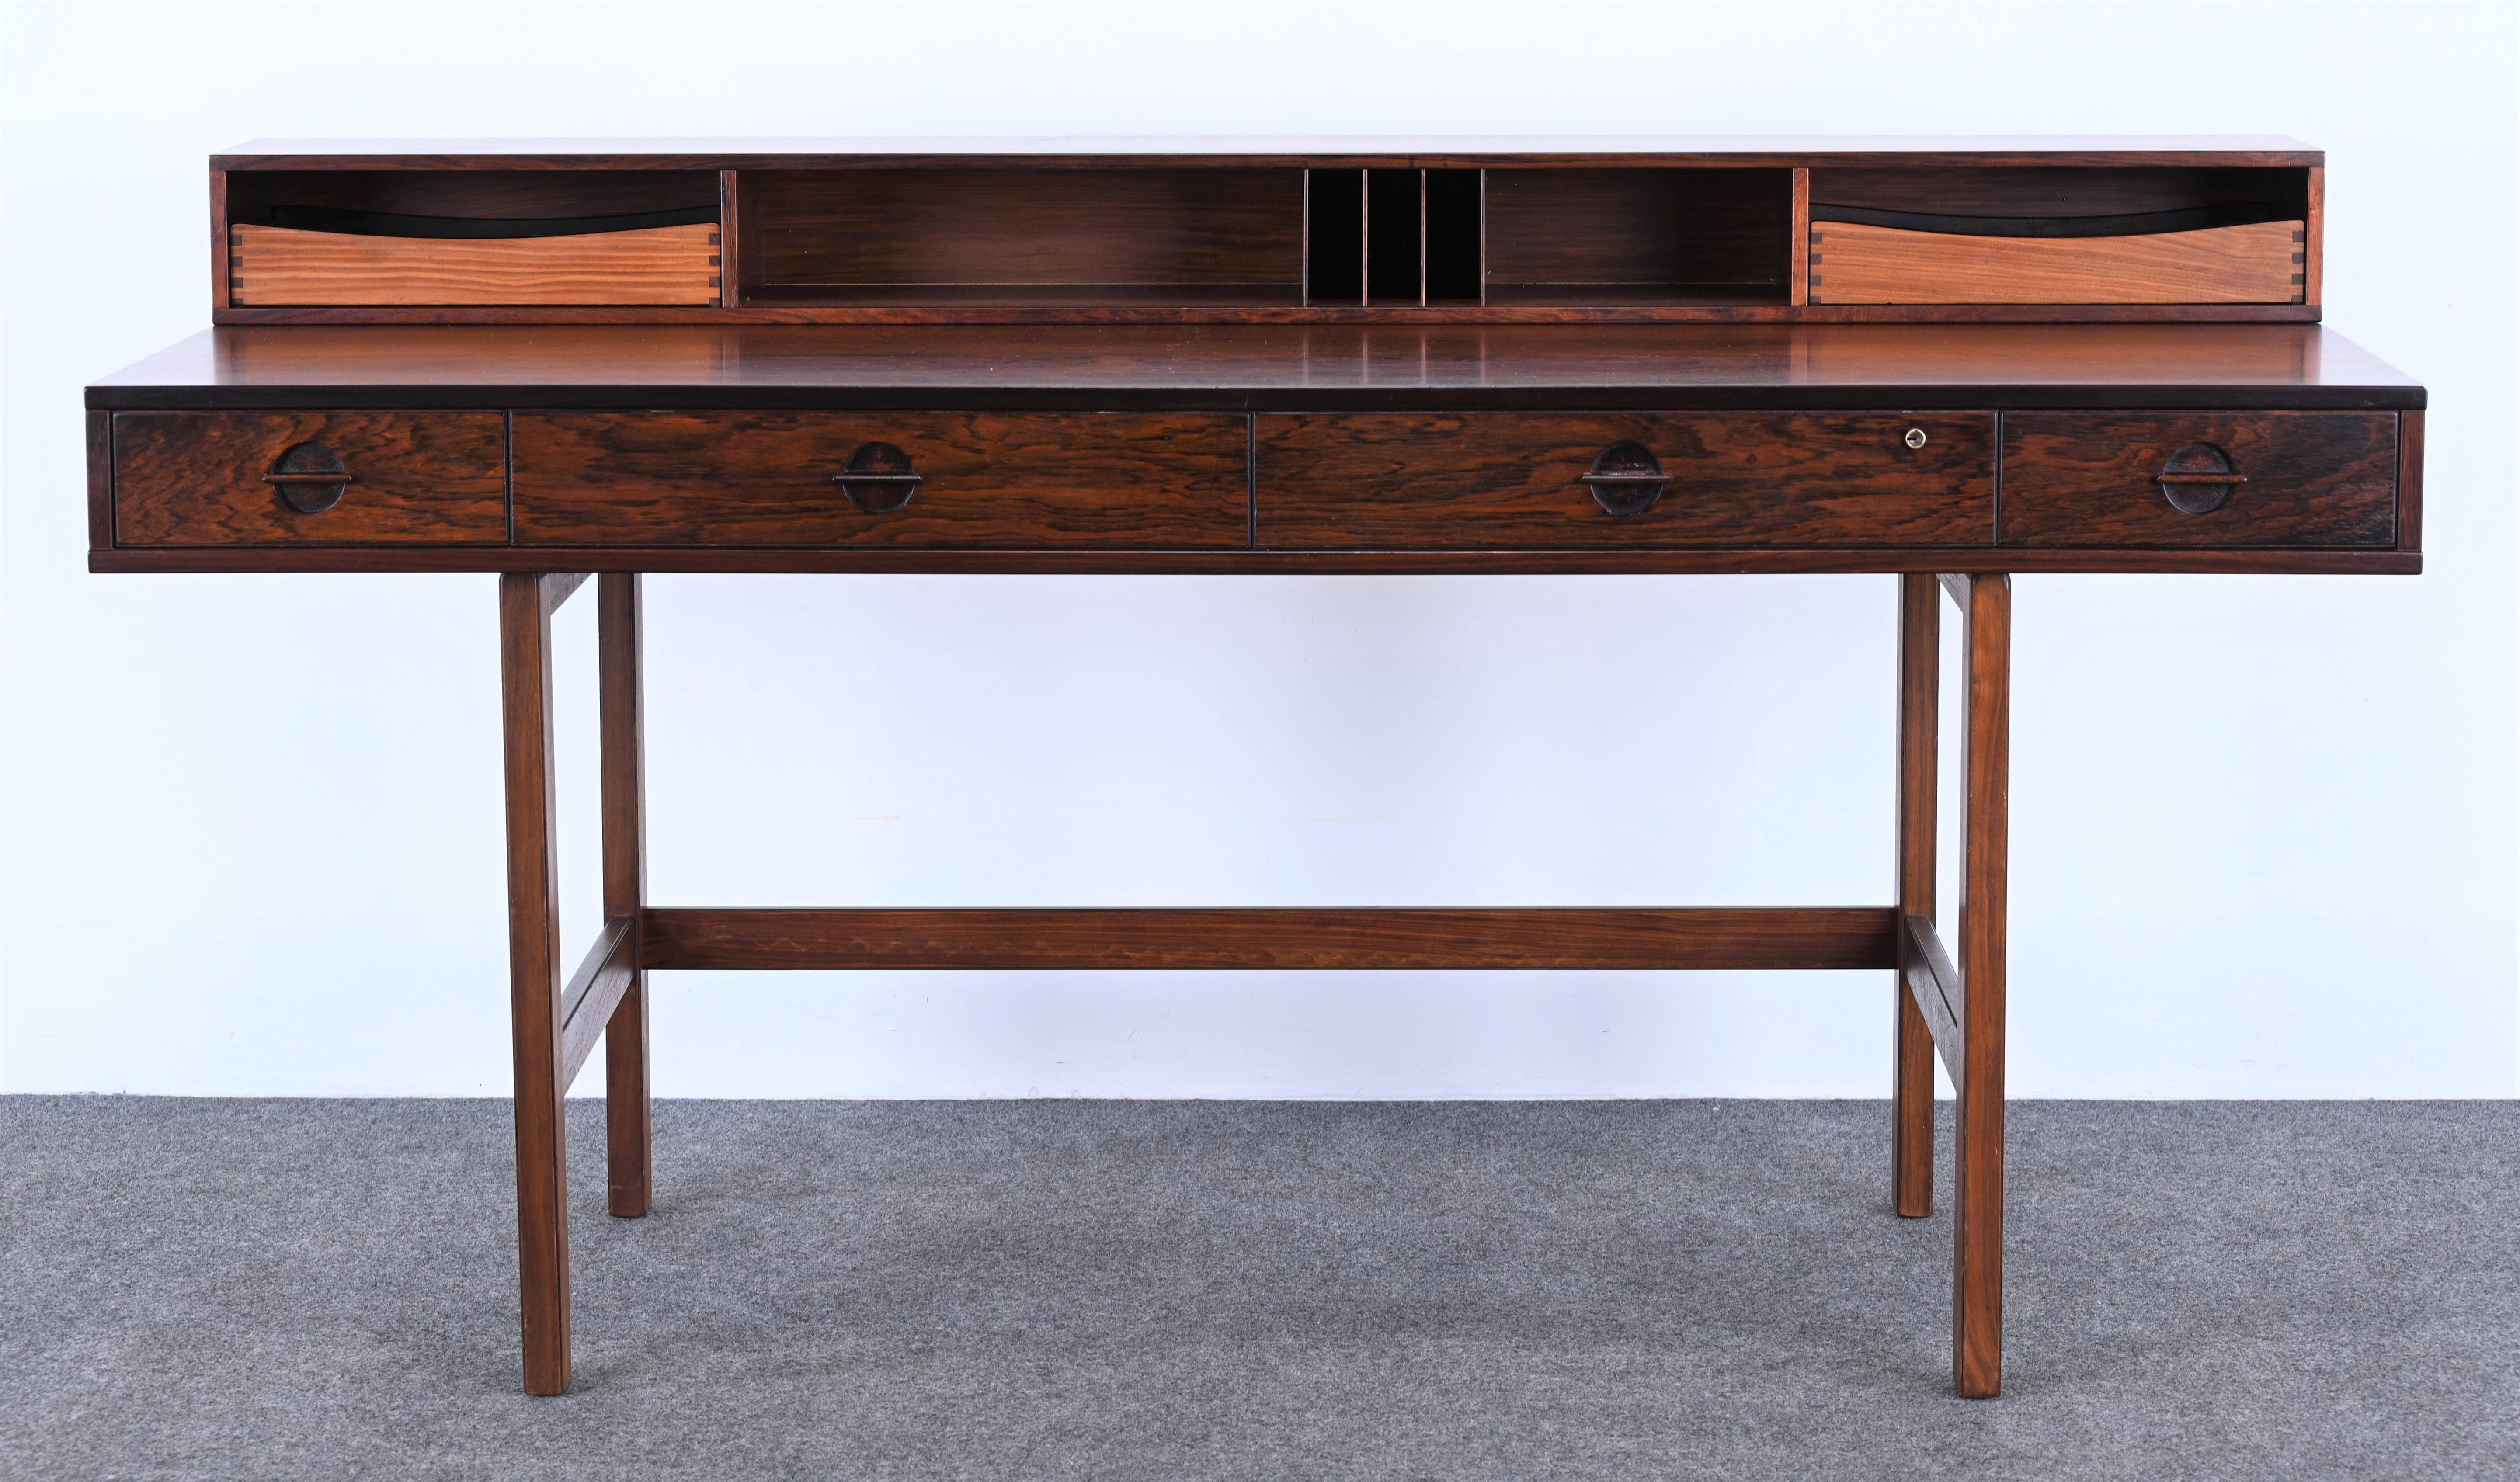 A beautiful expandable Danish Modern rosewood partners desk with a flip-top design by Jens Quistgaard for Peter Lovig Nielsen. This desk can be used either flipped down for expansive space or flipped up for ample storage. Solid rosewood construction